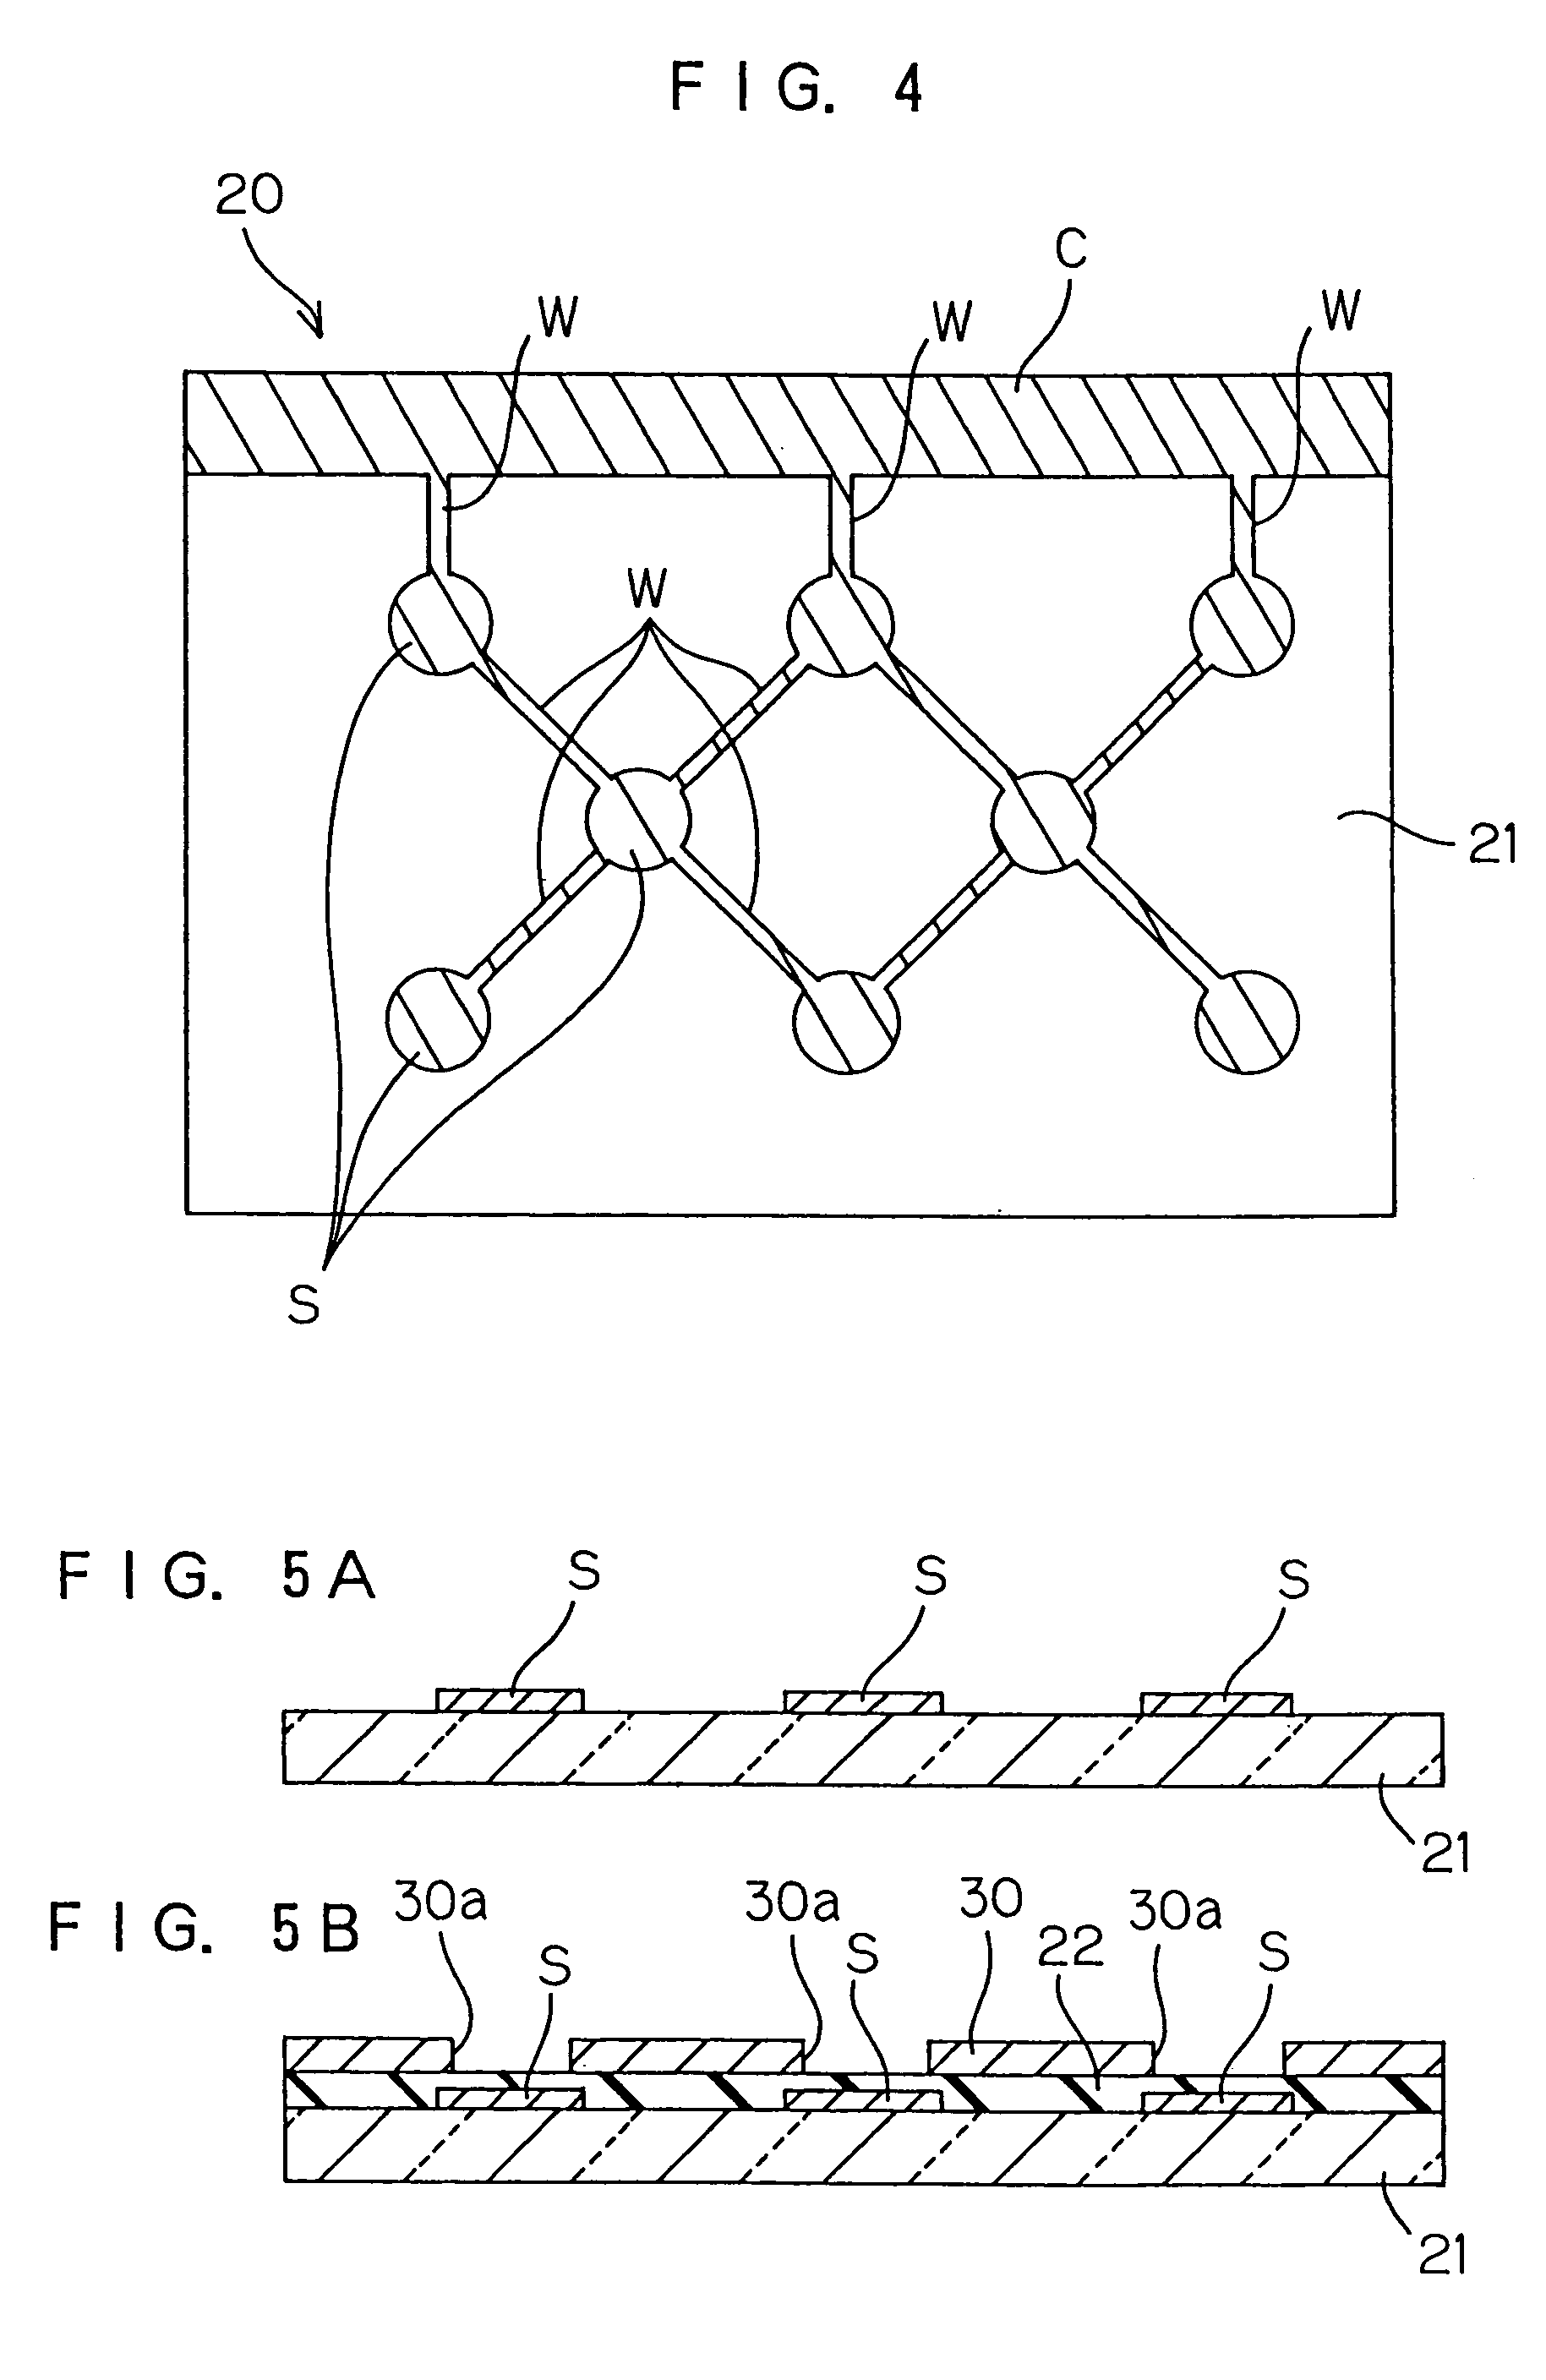 Production process for semiconductor device